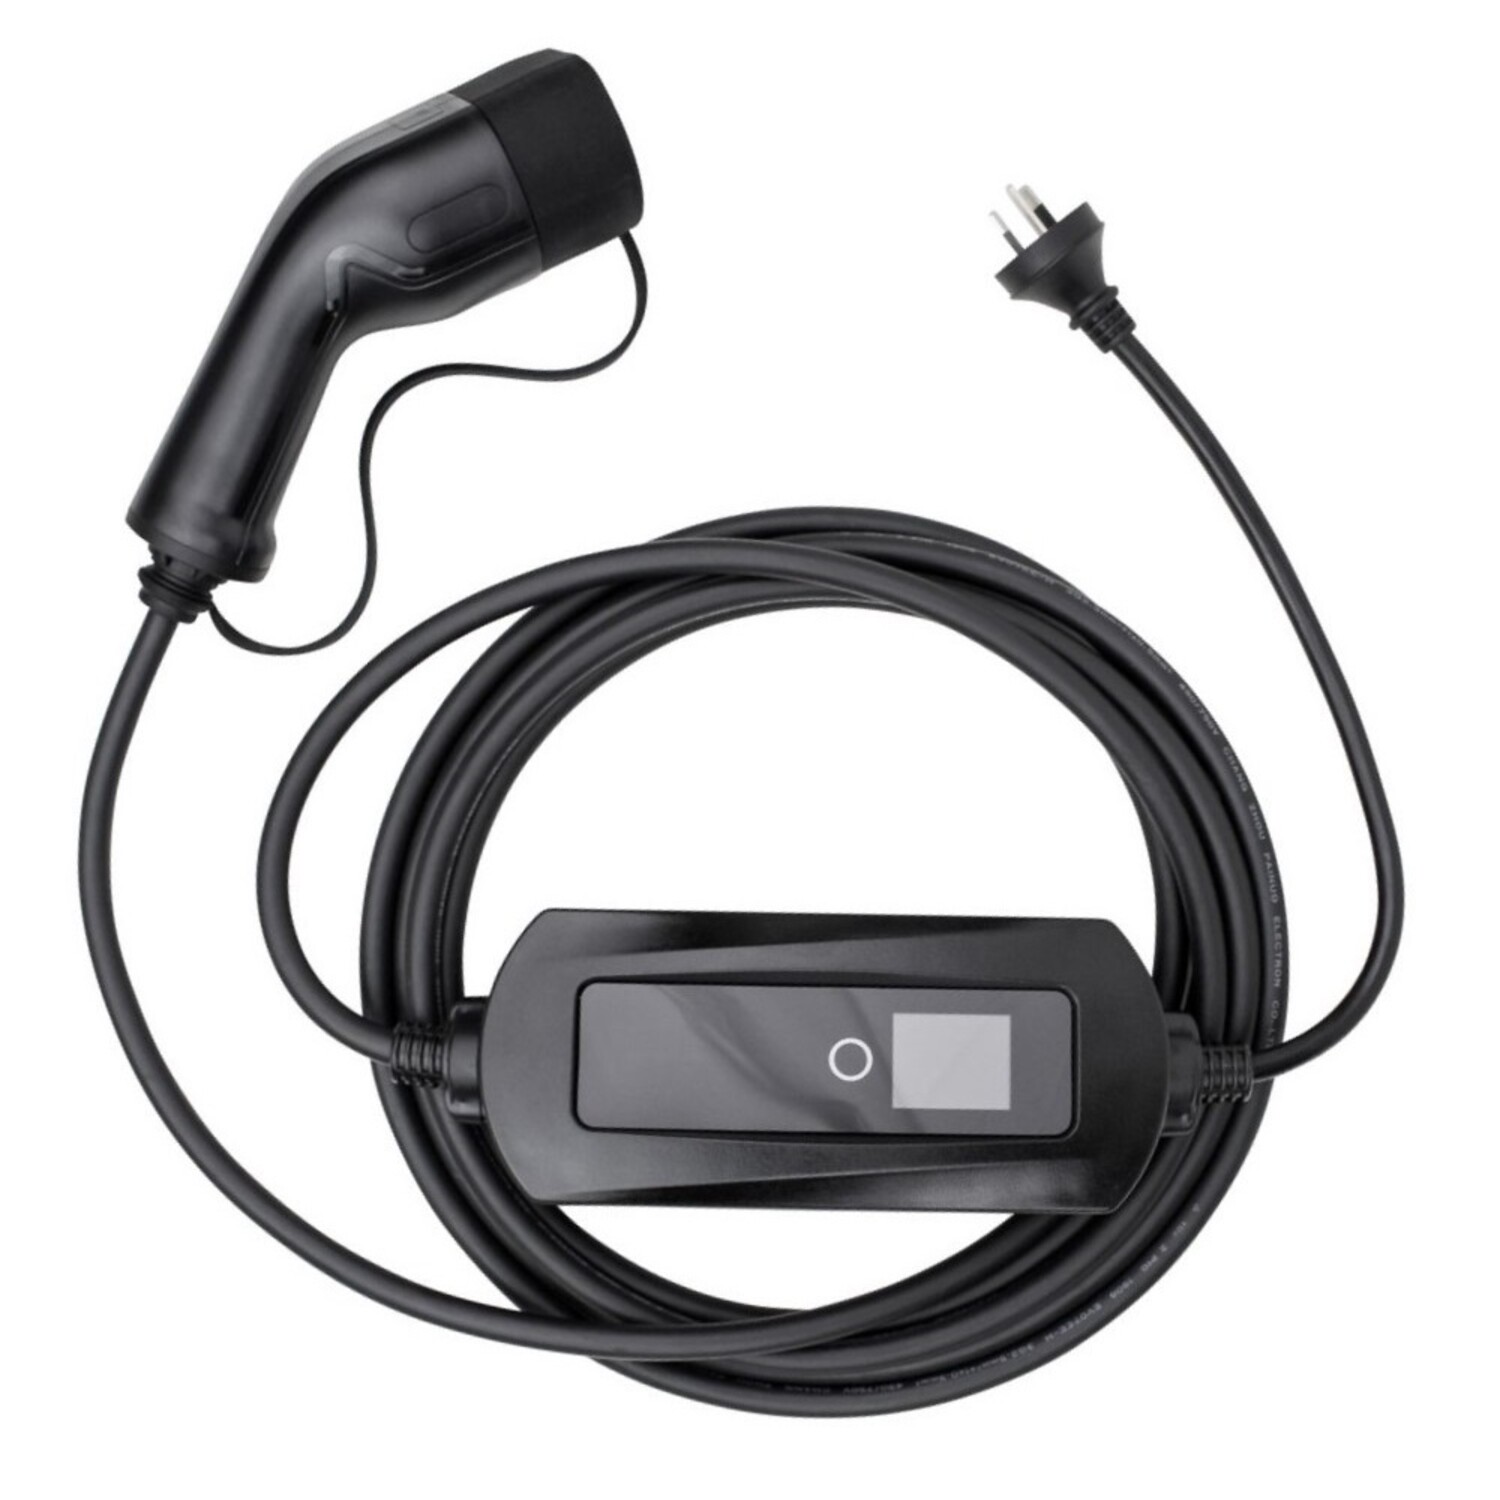 ChargeXpert ChargeXpert chargeur portable réglable - type 2 - AU 3 pin - AS  3112 - 8-13A